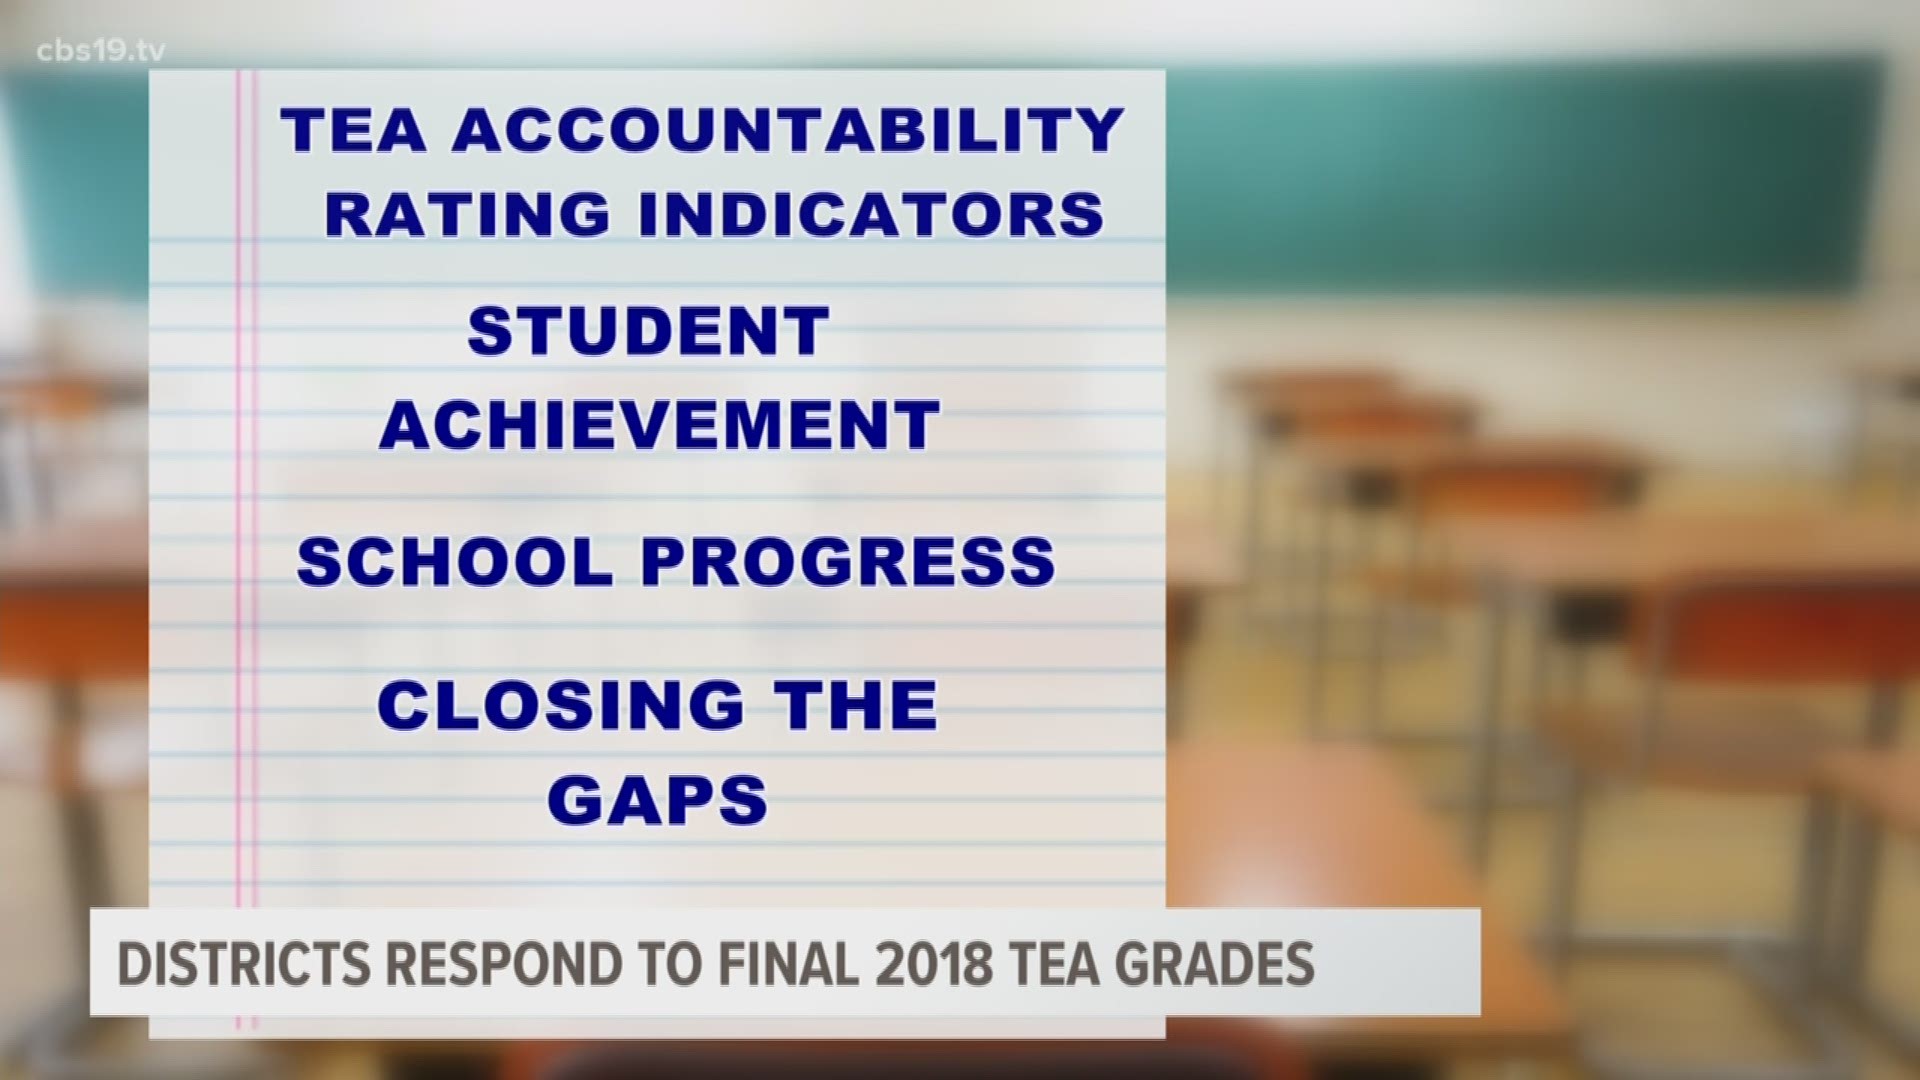 The Texas Education Agency released its final 2018 accountability ratings for 1200 schools districts and charters this week. The ratings for East Texas districts remained unchanged, and local districts respond to their grade.